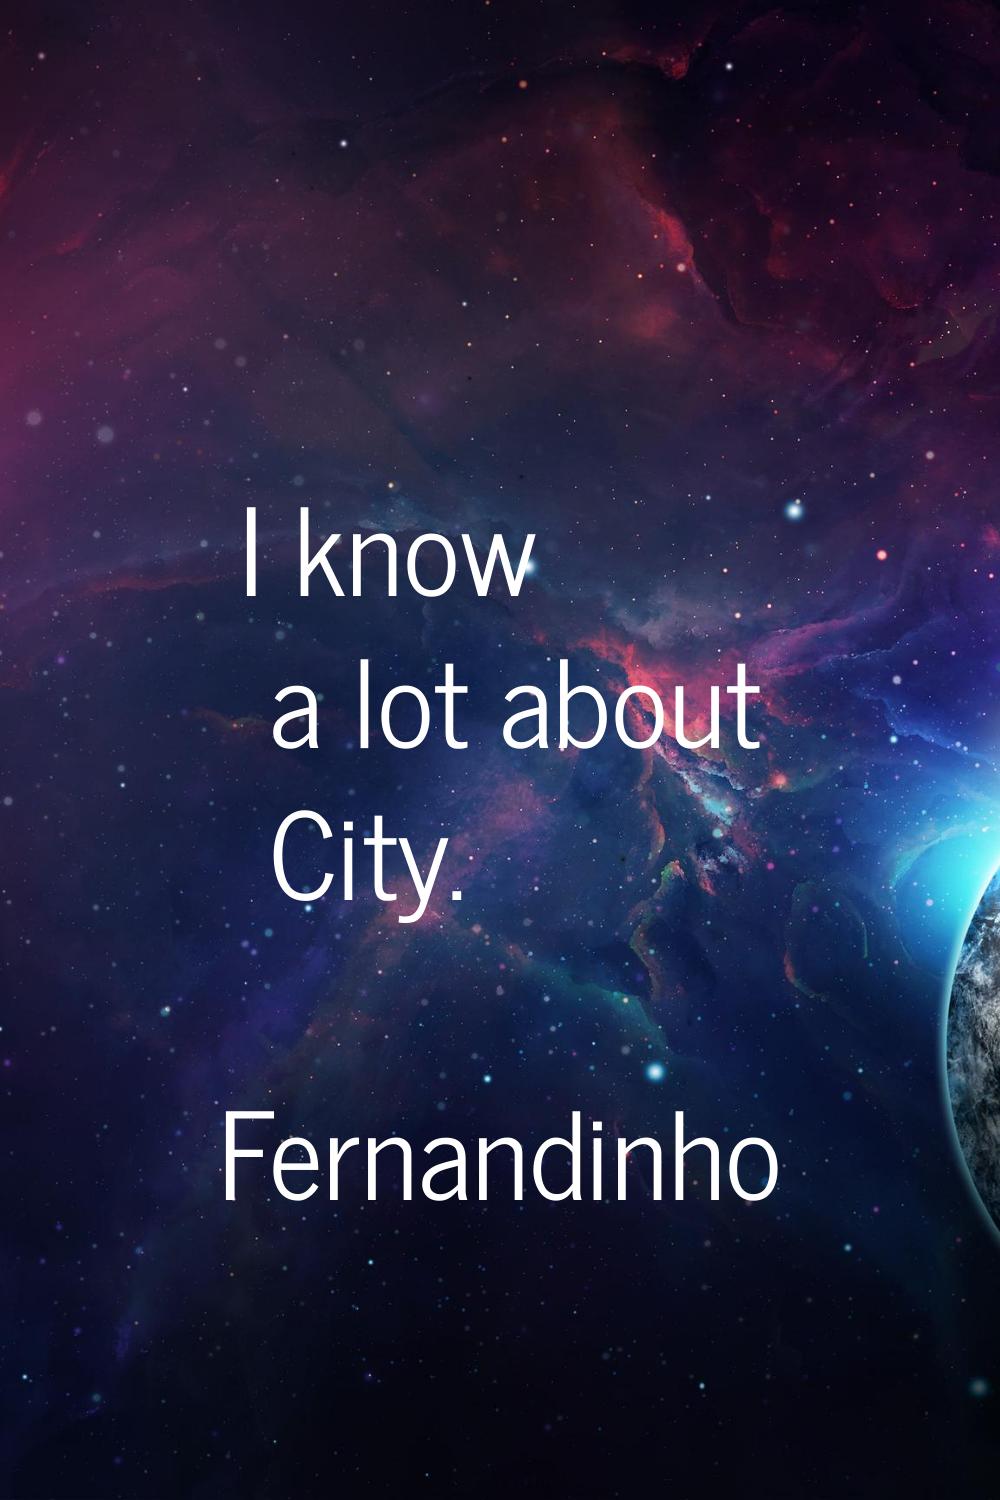 I know a lot about City.